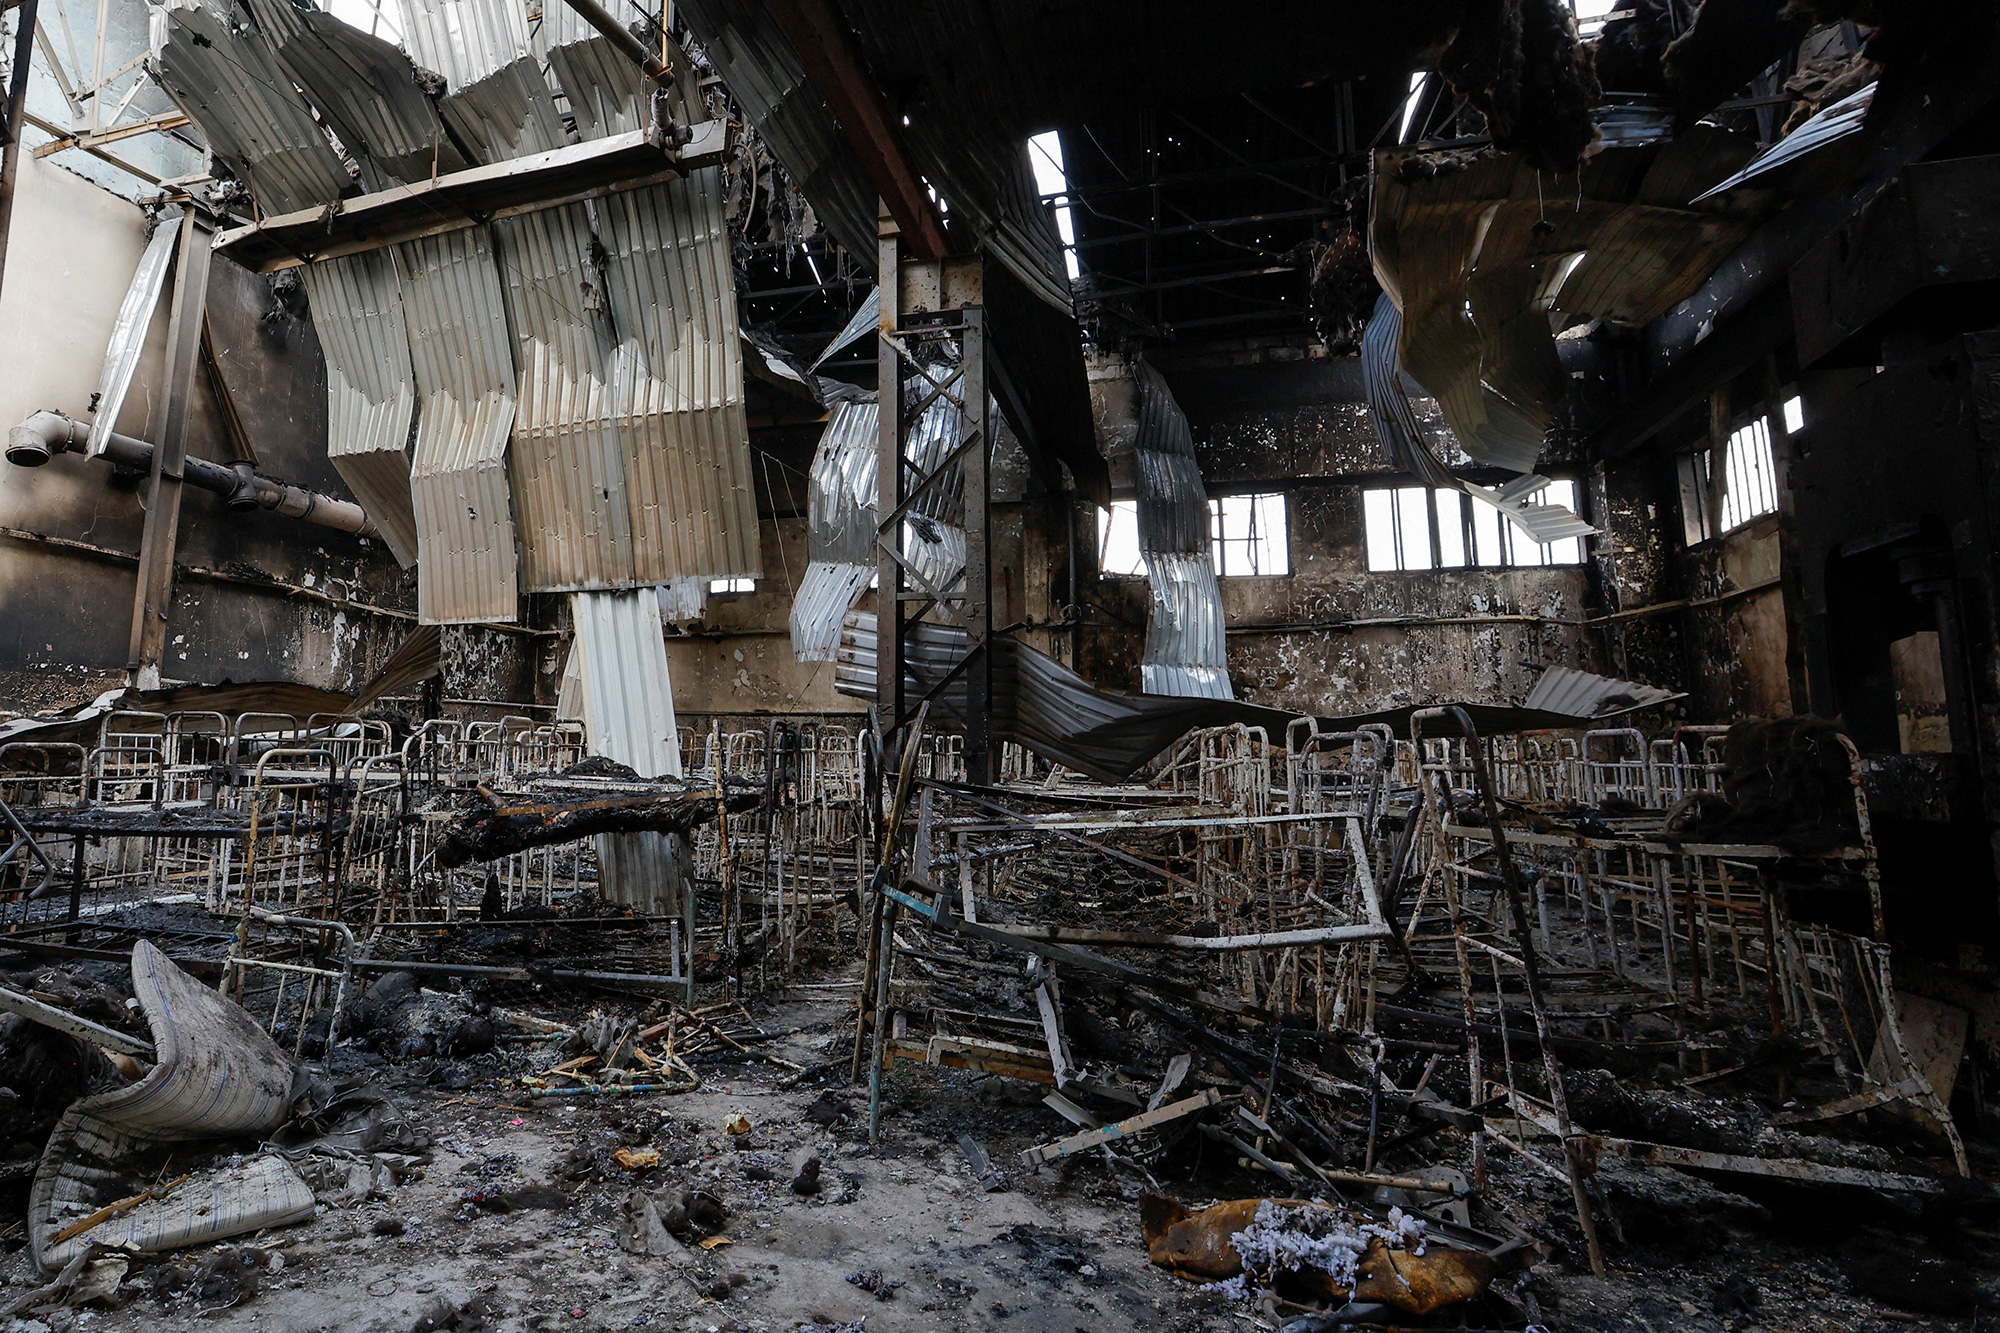 Debris in a pre-trial detention center after an attack, in the separatist-controlled region of Olenivka, in the Donetsk Region of Ukraine on July 29, 2022.